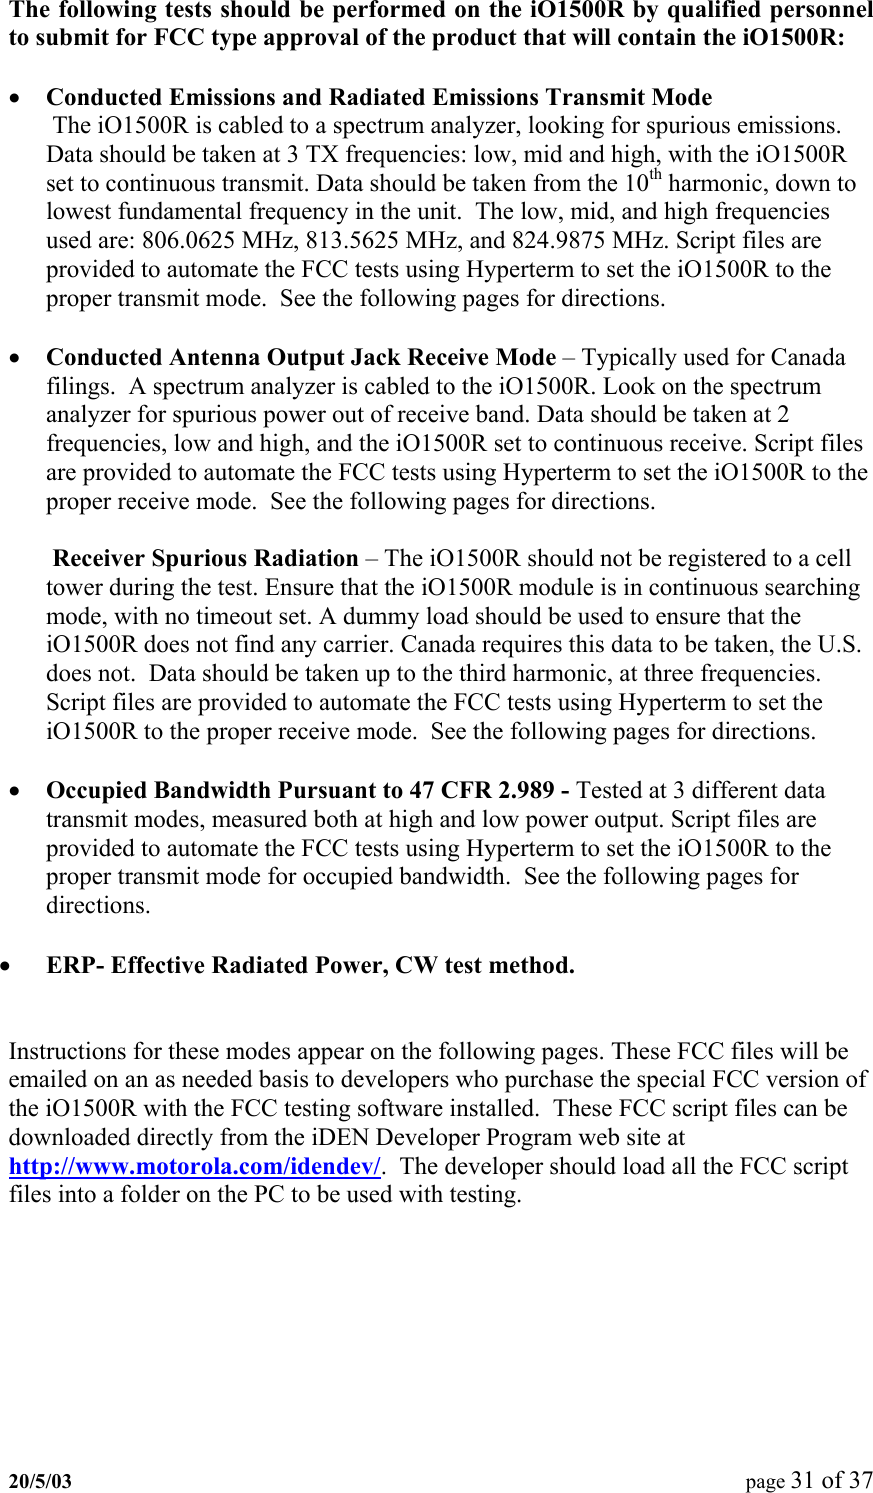 The following tests should be performed on the iO1500R by qualified personnel to submit for FCC type approval of the product that will contain the iO1500R:  •  Conducted Emissions and Radiated Emissions Transmit Mode The iO1500R is cabled to a spectrum analyzer, looking for spurious emissions. Data should be taken at 3 TX frequencies: low, mid and high, with the iO1500R set to continuous transmit. Data should be taken from the 10th harmonic, down to lowest fundamental frequency in the unit.  The low, mid, and high frequencies used are: 806.0625 MHz, 813.5625 MHz, and 824.9875 MHz. Script files are provided to automate the FCC tests using Hyperterm to set the iO1500R to the proper transmit mode.  See the following pages for directions.  •  Conducted Antenna Output Jack Receive Mode – Typically used for Canada filings.  A spectrum analyzer is cabled to the iO1500R. Look on the spectrum analyzer for spurious power out of receive band. Data should be taken at 2 frequencies, low and high, and the iO1500R set to continuous receive. Script files are provided to automate the FCC tests using Hyperterm to set the iO1500R to the proper receive mode.  See the following pages for directions.  Receiver Spurious Radiation – The iO1500R should not be registered to a cell tower during the test. Ensure that the iO1500R module is in continuous searching mode, with no timeout set. A dummy load should be used to ensure that the iO1500R does not find any carrier. Canada requires this data to be taken, the U.S. does not.  Data should be taken up to the third harmonic, at three frequencies. Script files are provided to automate the FCC tests using Hyperterm to set the iO1500R to the proper receive mode.  See the following pages for directions.  •  Occupied Bandwidth Pursuant to 47 CFR 2.989 - Tested at 3 different data transmit modes, measured both at high and low power output. Script files are provided to automate the FCC tests using Hyperterm to set the iO1500R to the proper transmit mode for occupied bandwidth.  See the following pages for directions.  •  ERP- Effective Radiated Power, CW test method.   Instructions for these modes appear on the following pages. These FCC files will be emailed on an as needed basis to developers who purchase the special FCC version of the iO1500R with the FCC testing software installed.  These FCC script files can be downloaded directly from the iDEN Developer Program web site at http://www.motorola.com/idendev/.  The developer should load all the FCC script files into a folder on the PC to be used with testing.20/5/03  page 31 of 37   